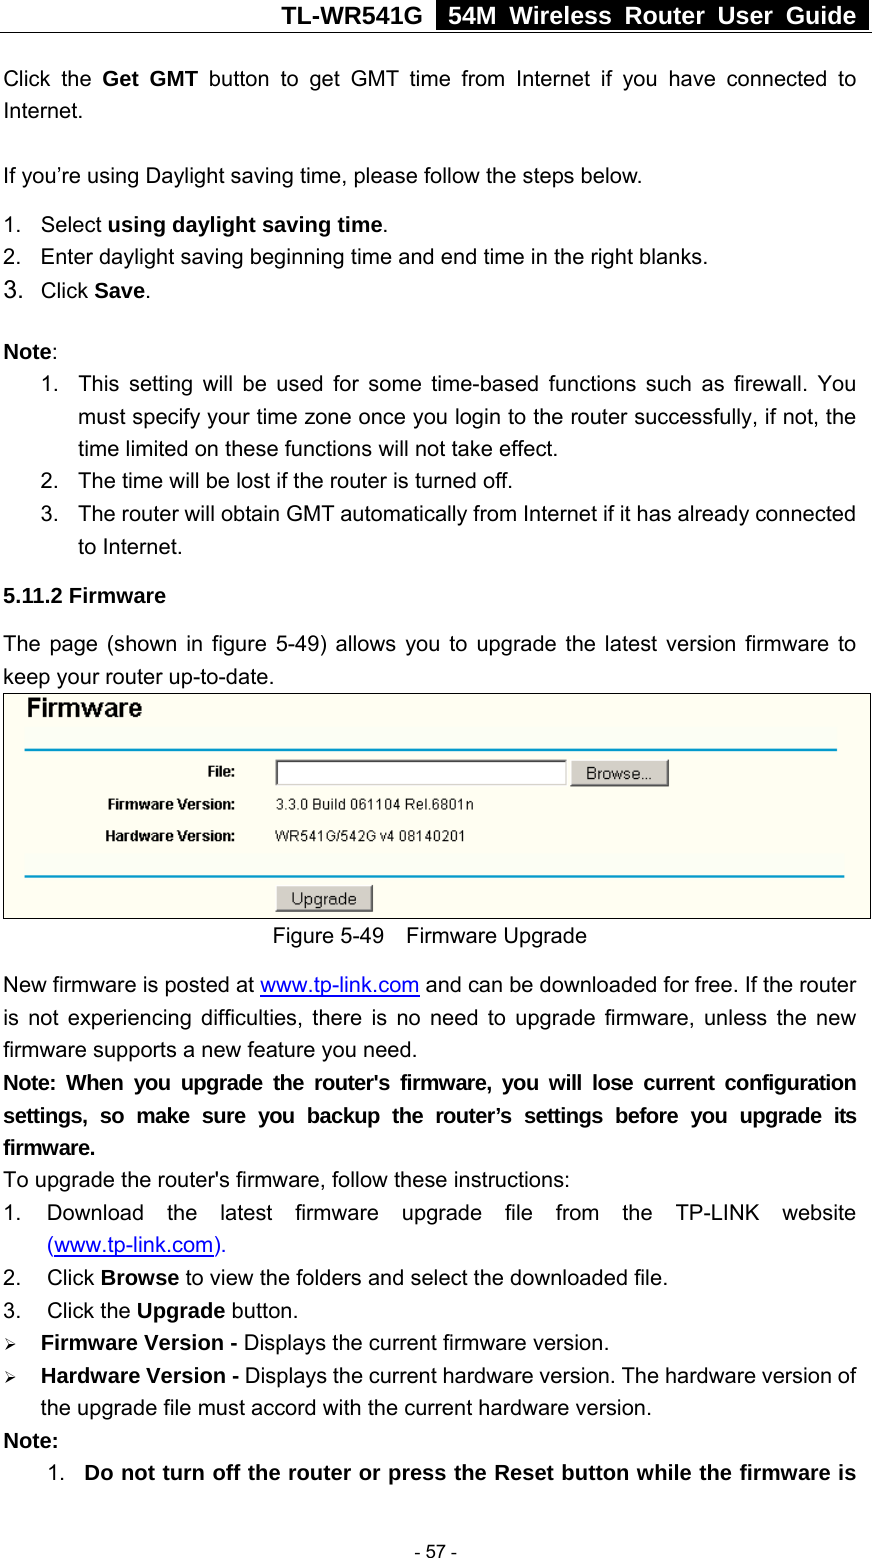 TL-WR541G   54M Wireless Router User Guide  Click the Get GMT button to get GMT time from Internet if you have connected to Internet.   If you’re using Daylight saving time, please follow the steps below. 1. Select using daylight saving time.  2.  Enter daylight saving beginning time and end time in the right blanks.   3.  Click Save.   Note:  1.  This setting will be used for some time-based functions such as firewall. You must specify your time zone once you login to the router successfully, if not, the time limited on these functions will not take effect.   2.  The time will be lost if the router is turned off.   3.  The router will obtain GMT automatically from Internet if it has already connected to Internet. 5.11.2 Firmware The page (shown in figure 5-49) allows you to upgrade the latest version firmware to keep your router up-to-date.  Figure 5-49  Firmware Upgrade New firmware is posted at www.tp-link.com and can be downloaded for free. If the router is not experiencing difficulties, there is no need to upgrade firmware, unless the new firmware supports a new feature you need. Note: When you upgrade the router&apos;s firmware, you will lose current configuration settings, so make sure you backup the router’s settings before you upgrade its firmware. To upgrade the router&apos;s firmware, follow these instructions: 1.  Download the latest firmware upgrade file from the TP-LINK website (www.tp-link.com).  2. Click Browse to view the folders and select the downloaded file.   3. Click the Upgrade button.   ¾ Firmware Version - Displays the current firmware version. ¾ Hardware Version - Displays the current hardware version. The hardware version of the upgrade file must accord with the current hardware version. Note:  1.  Do not turn off the router or press the Reset button while the firmware is  - 57 - 